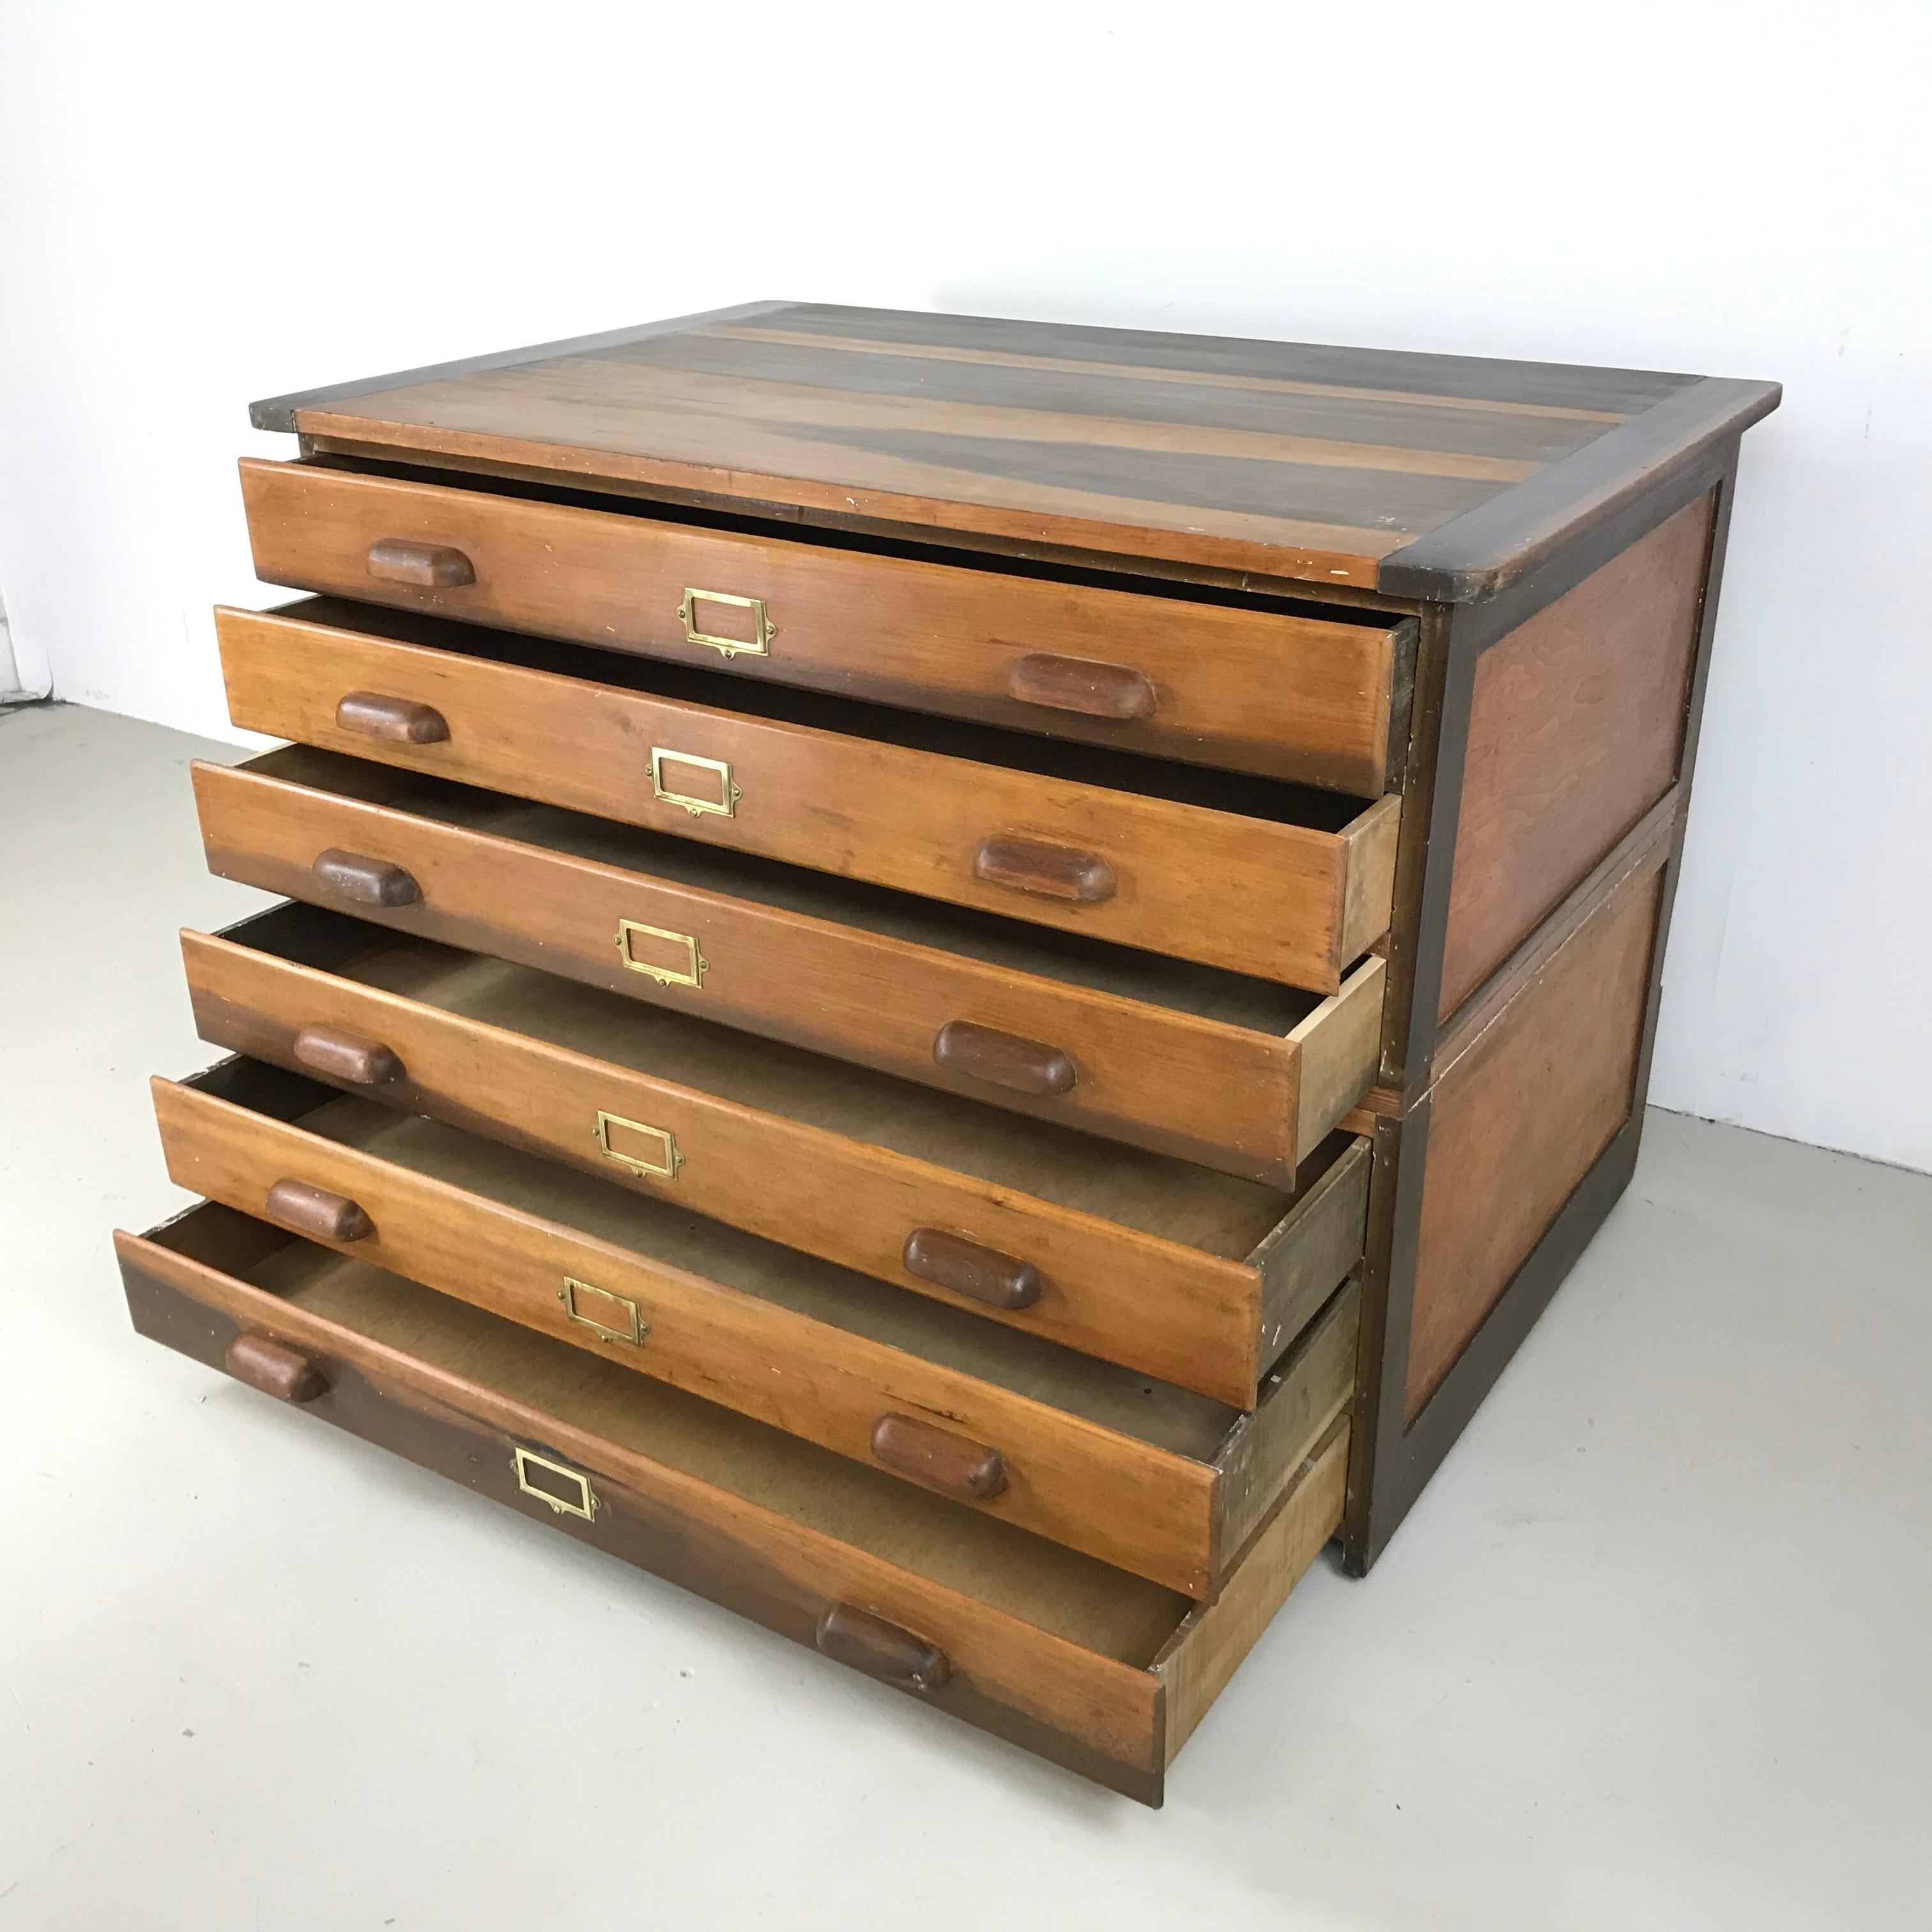 Mid-20th Century 1930s Plan Chest with Brass Cup Handles and Label Inserts